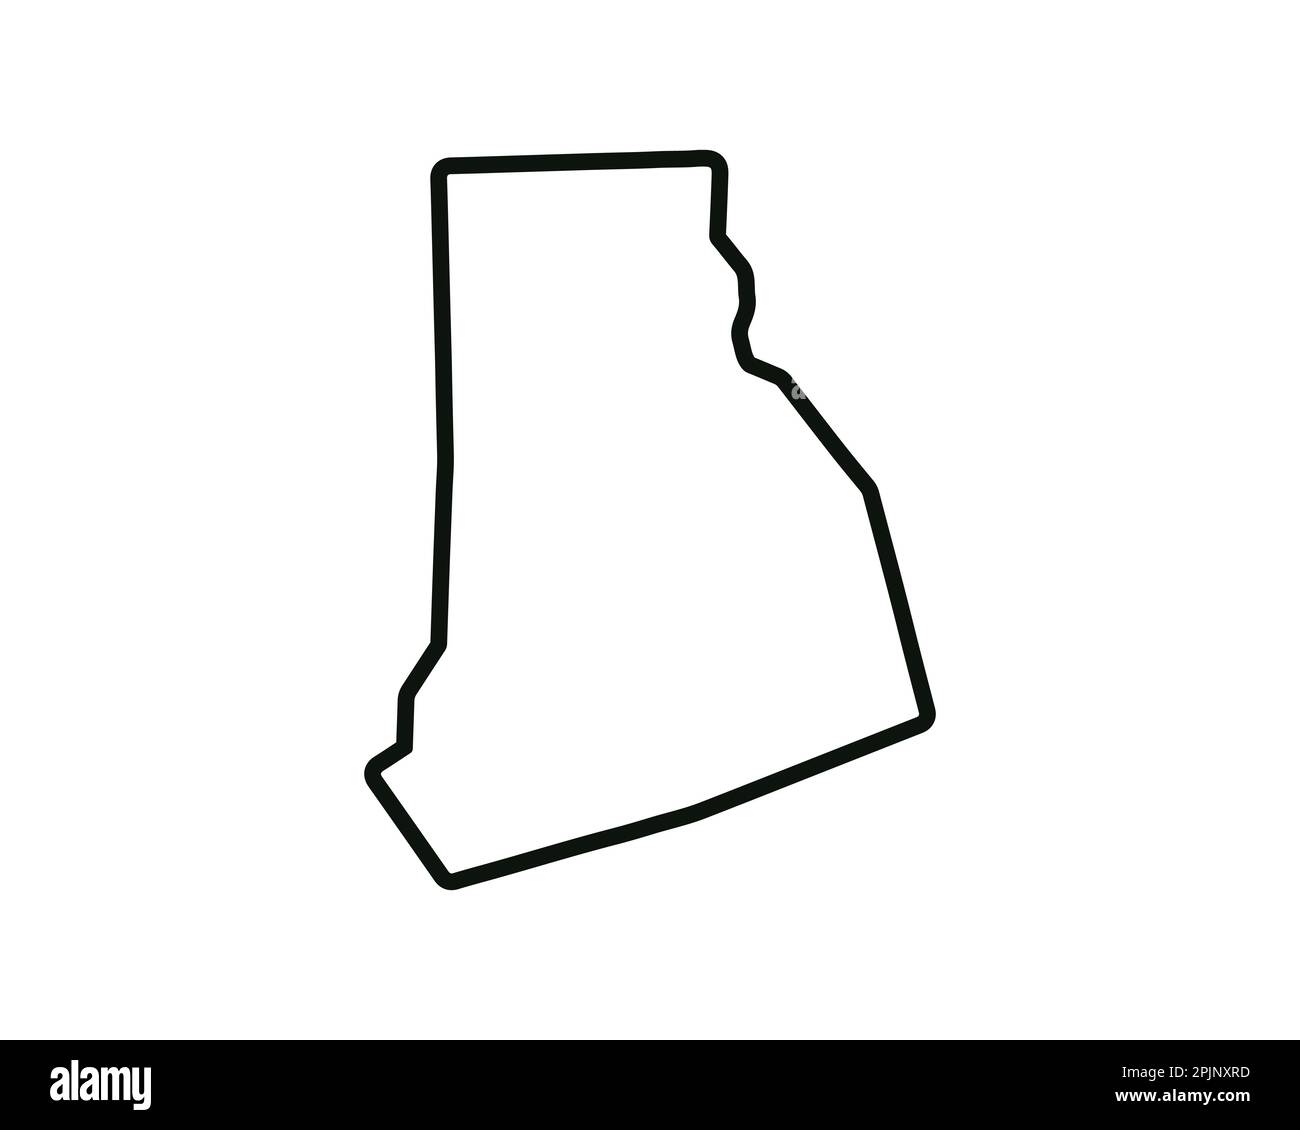 Rhode Island state map. US state map. Rhode Island outline symbol. Vector illustration Stock Vector